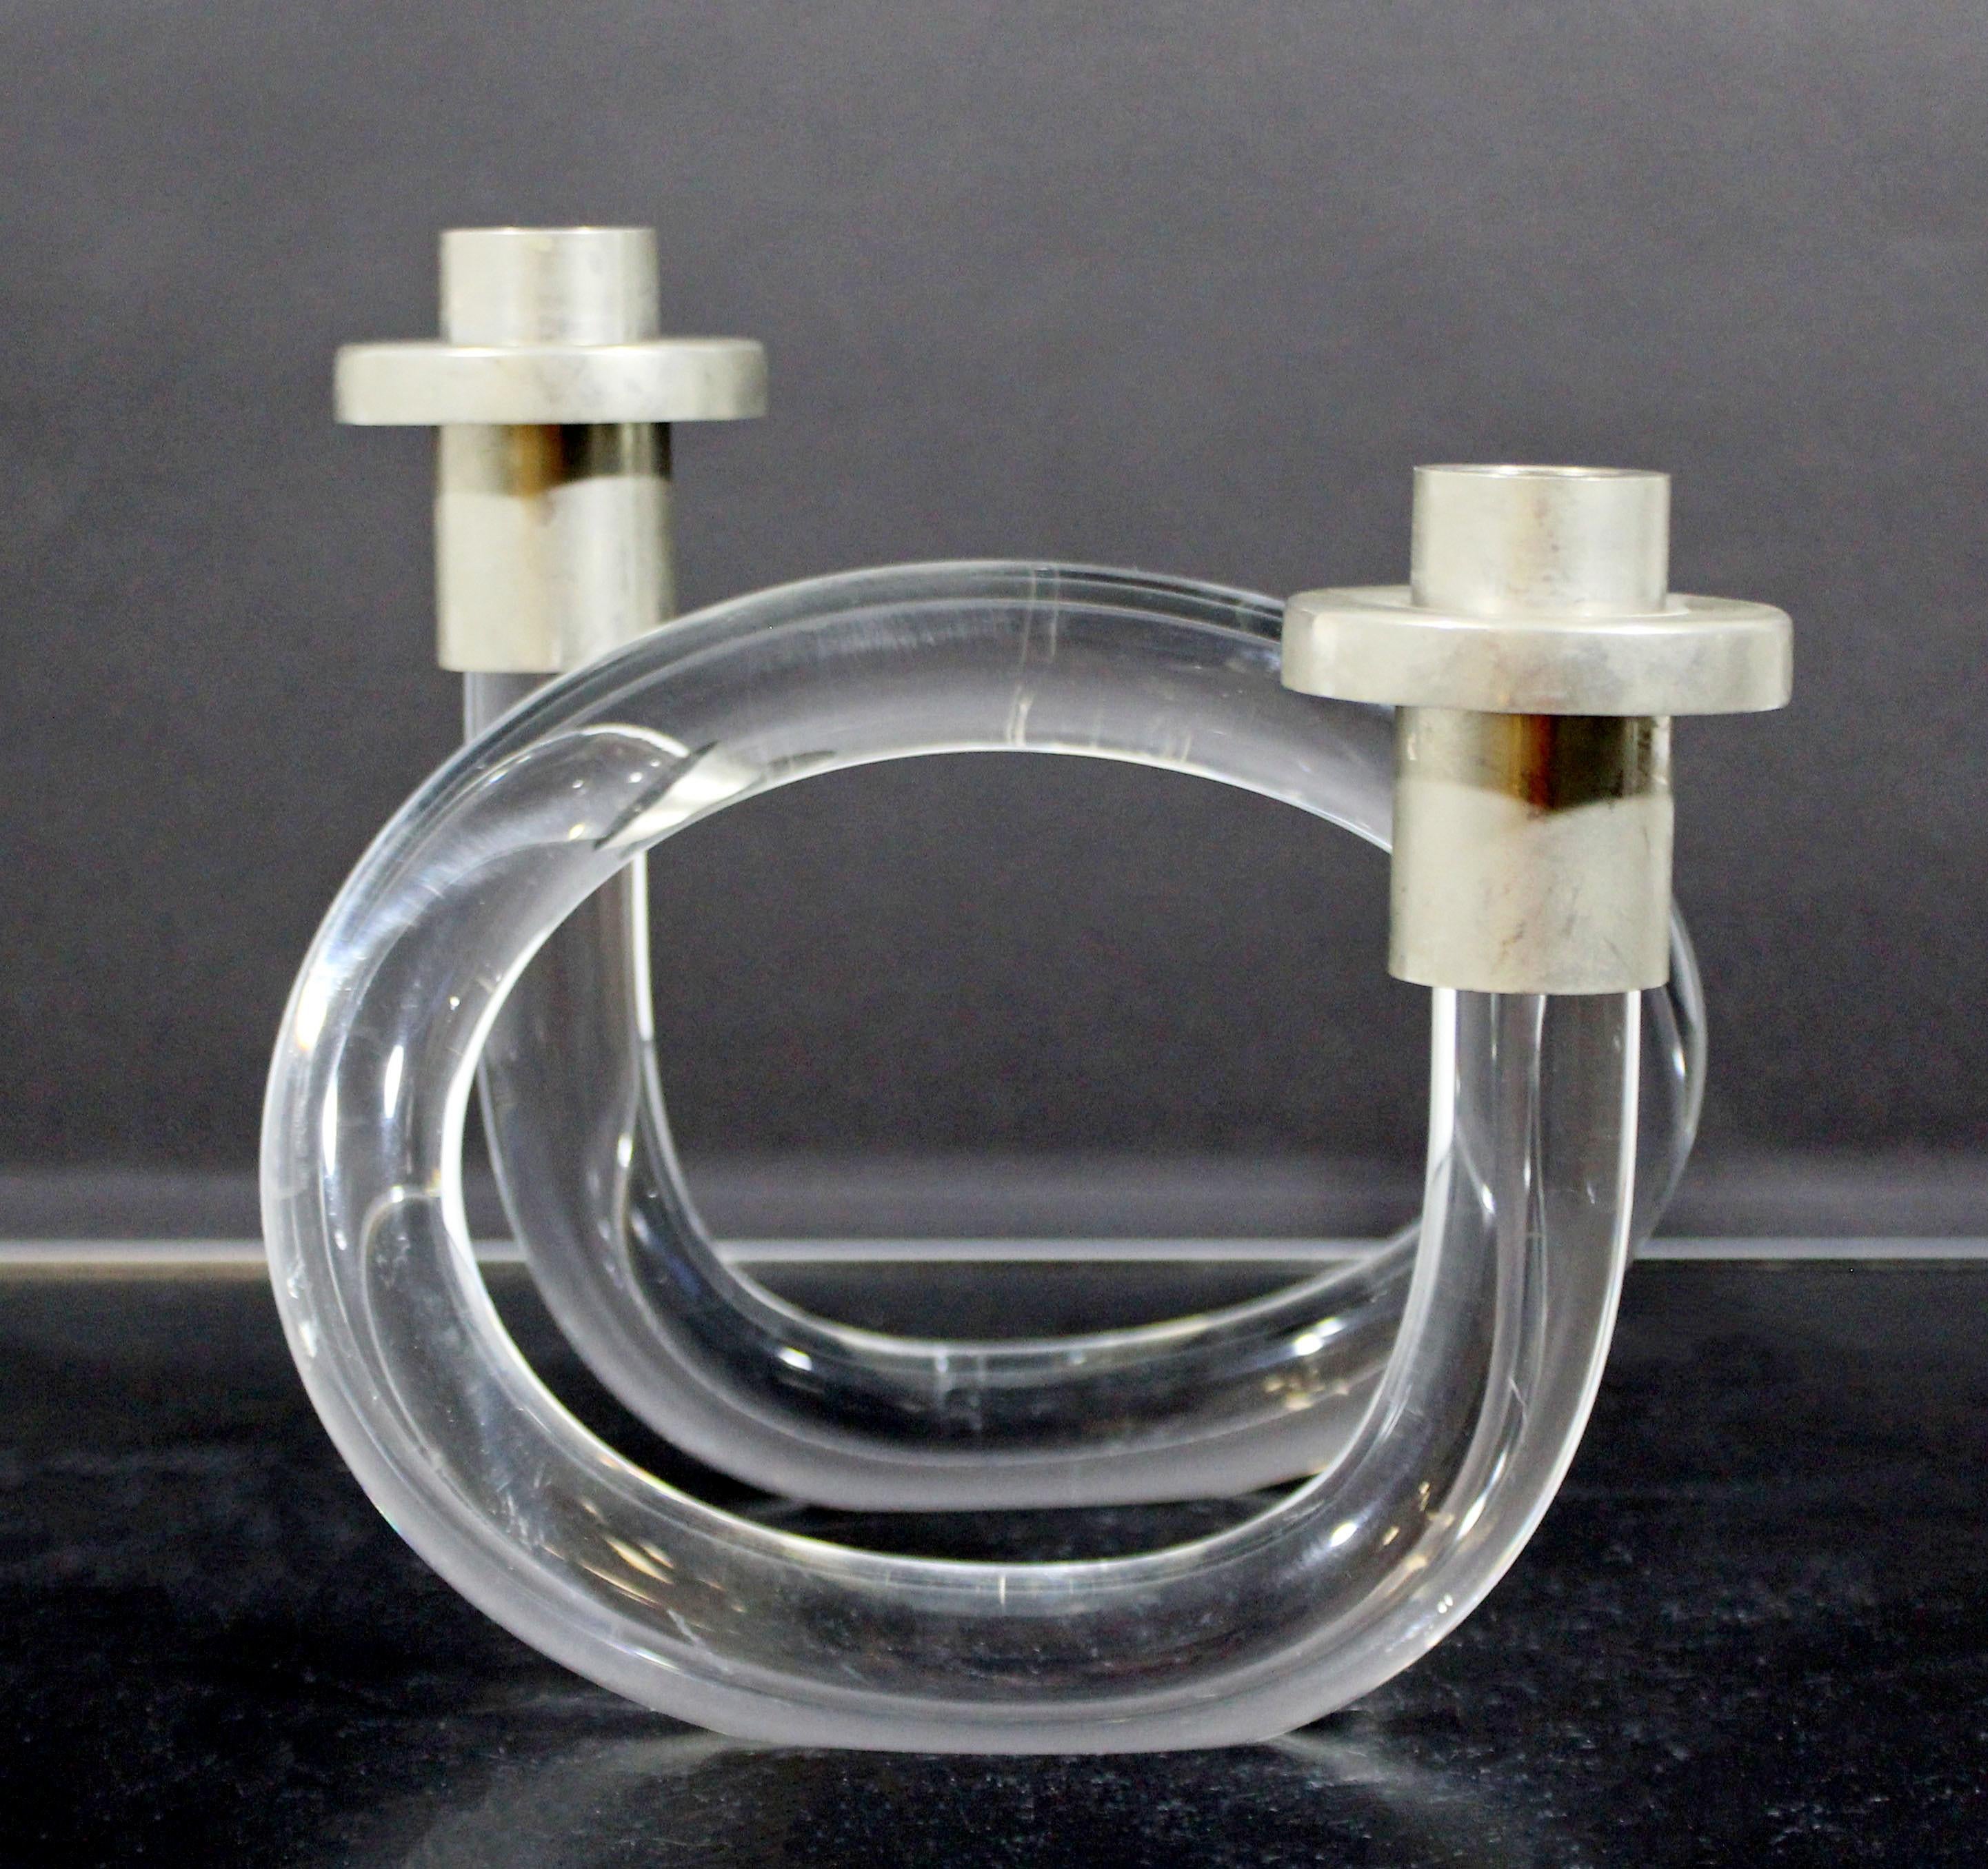 For your consideration is a gorgeous, dual headed, Lucite and aluminum candleholder, by Dorothy Thorpe, circa 1970s. In excellent vintage condition. The dimensions are 8